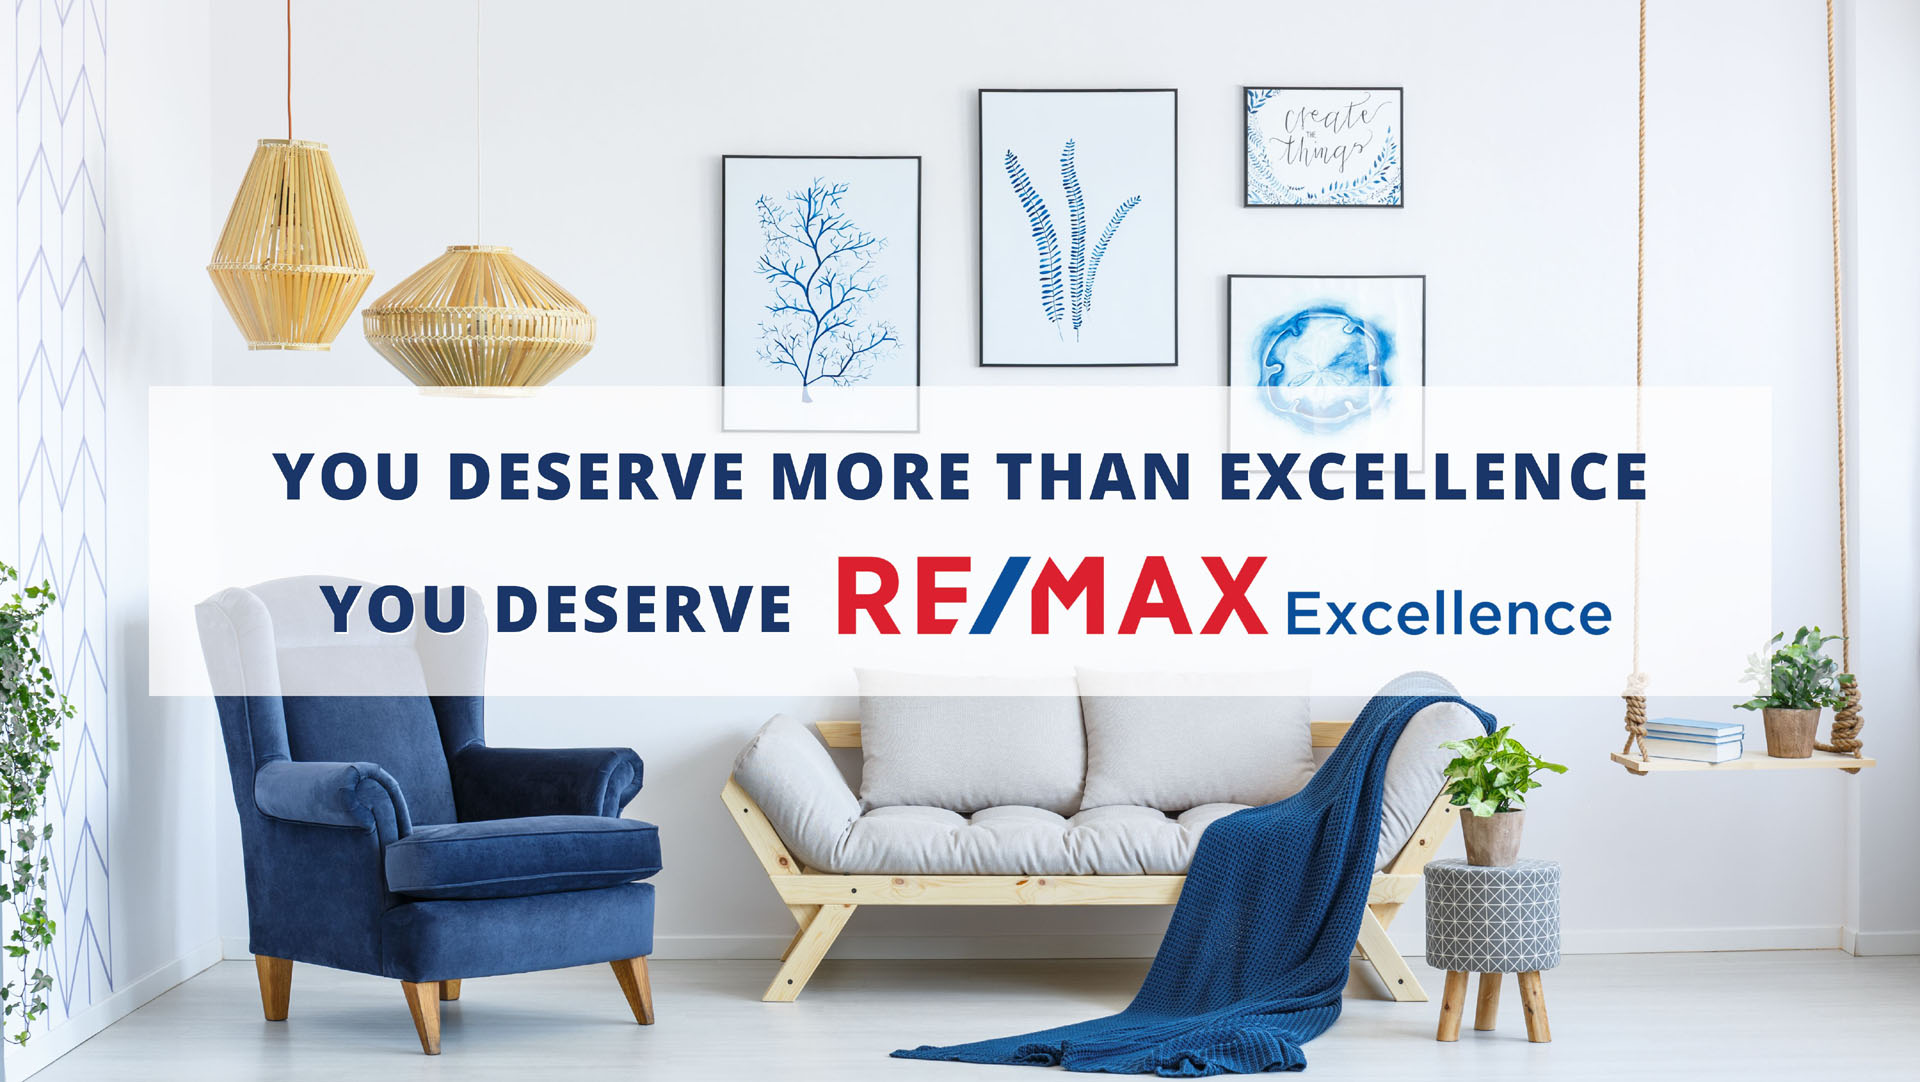 RE/MAX Excellence